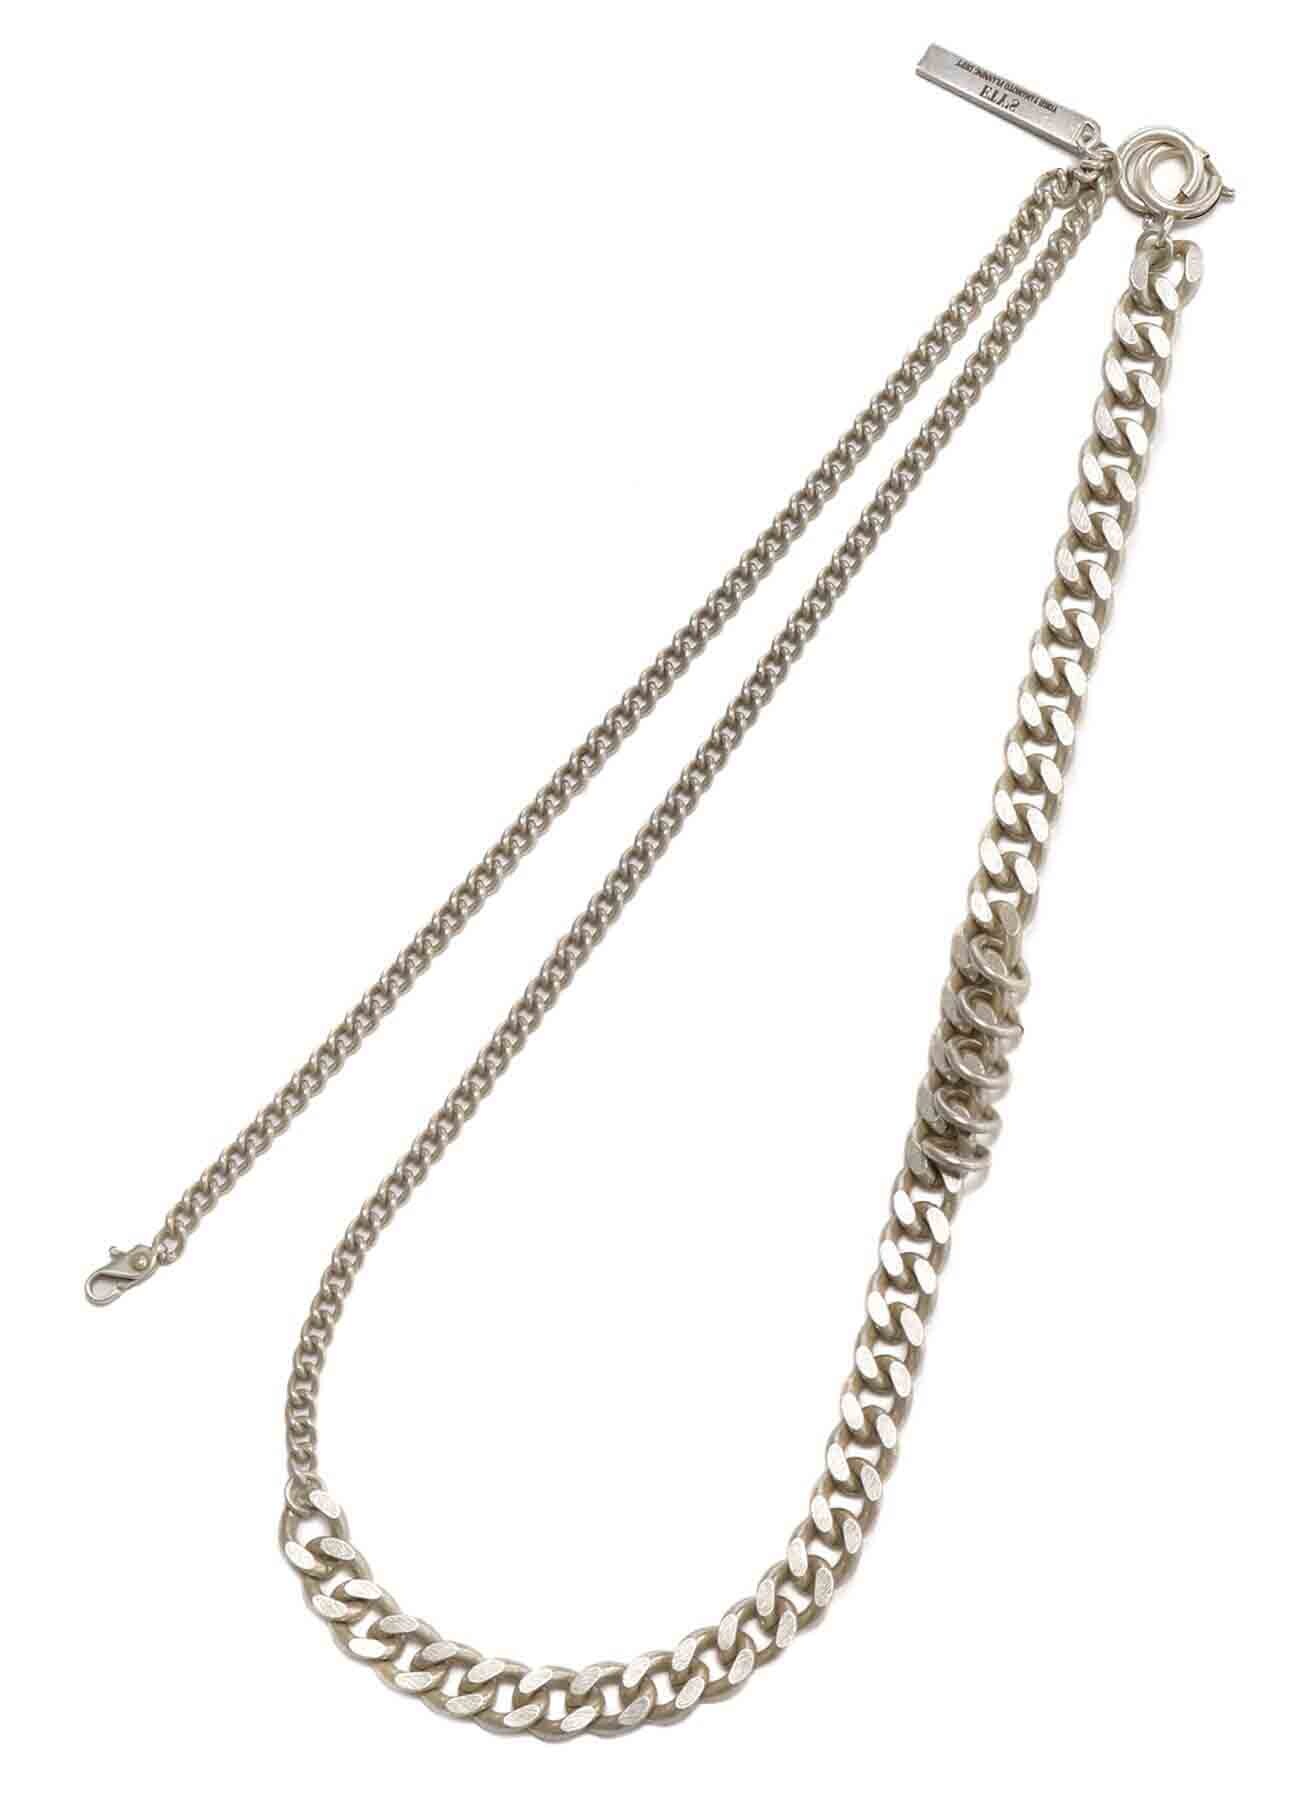 6-WAY CURVED CHAIN BRACELET NECKLACE(FREE SIZE Antique Silver): S